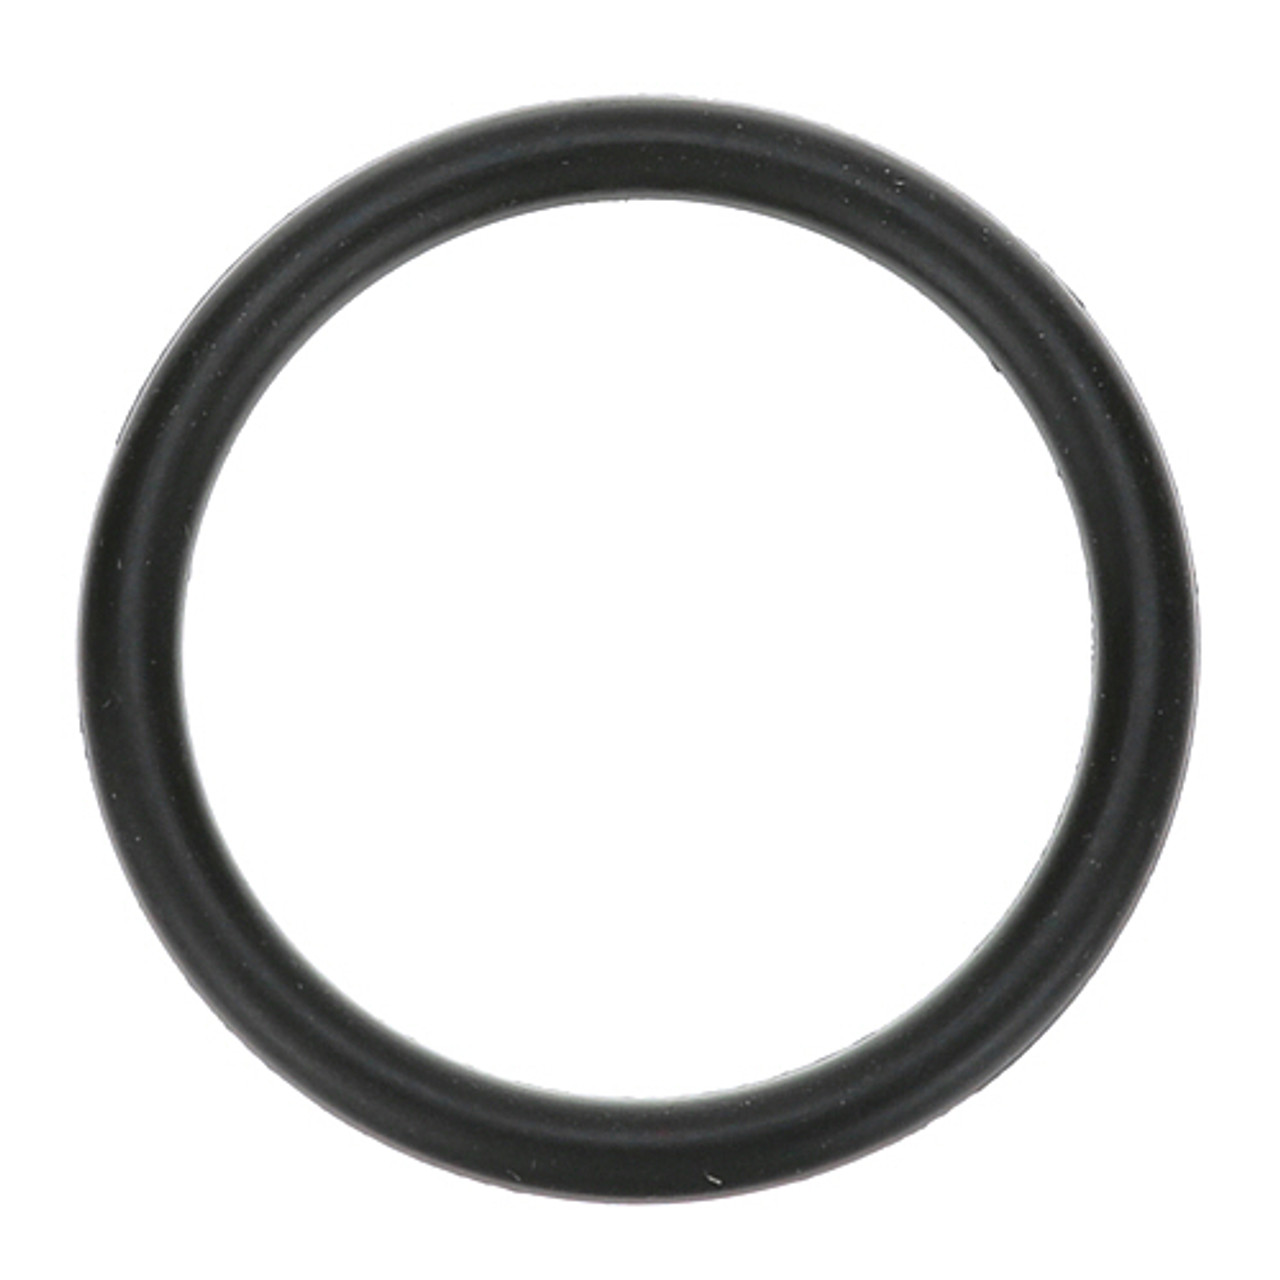 O-Ring 1-3/16" Id X 1/8" Width - Replacement Part For Electro Freeze 159295